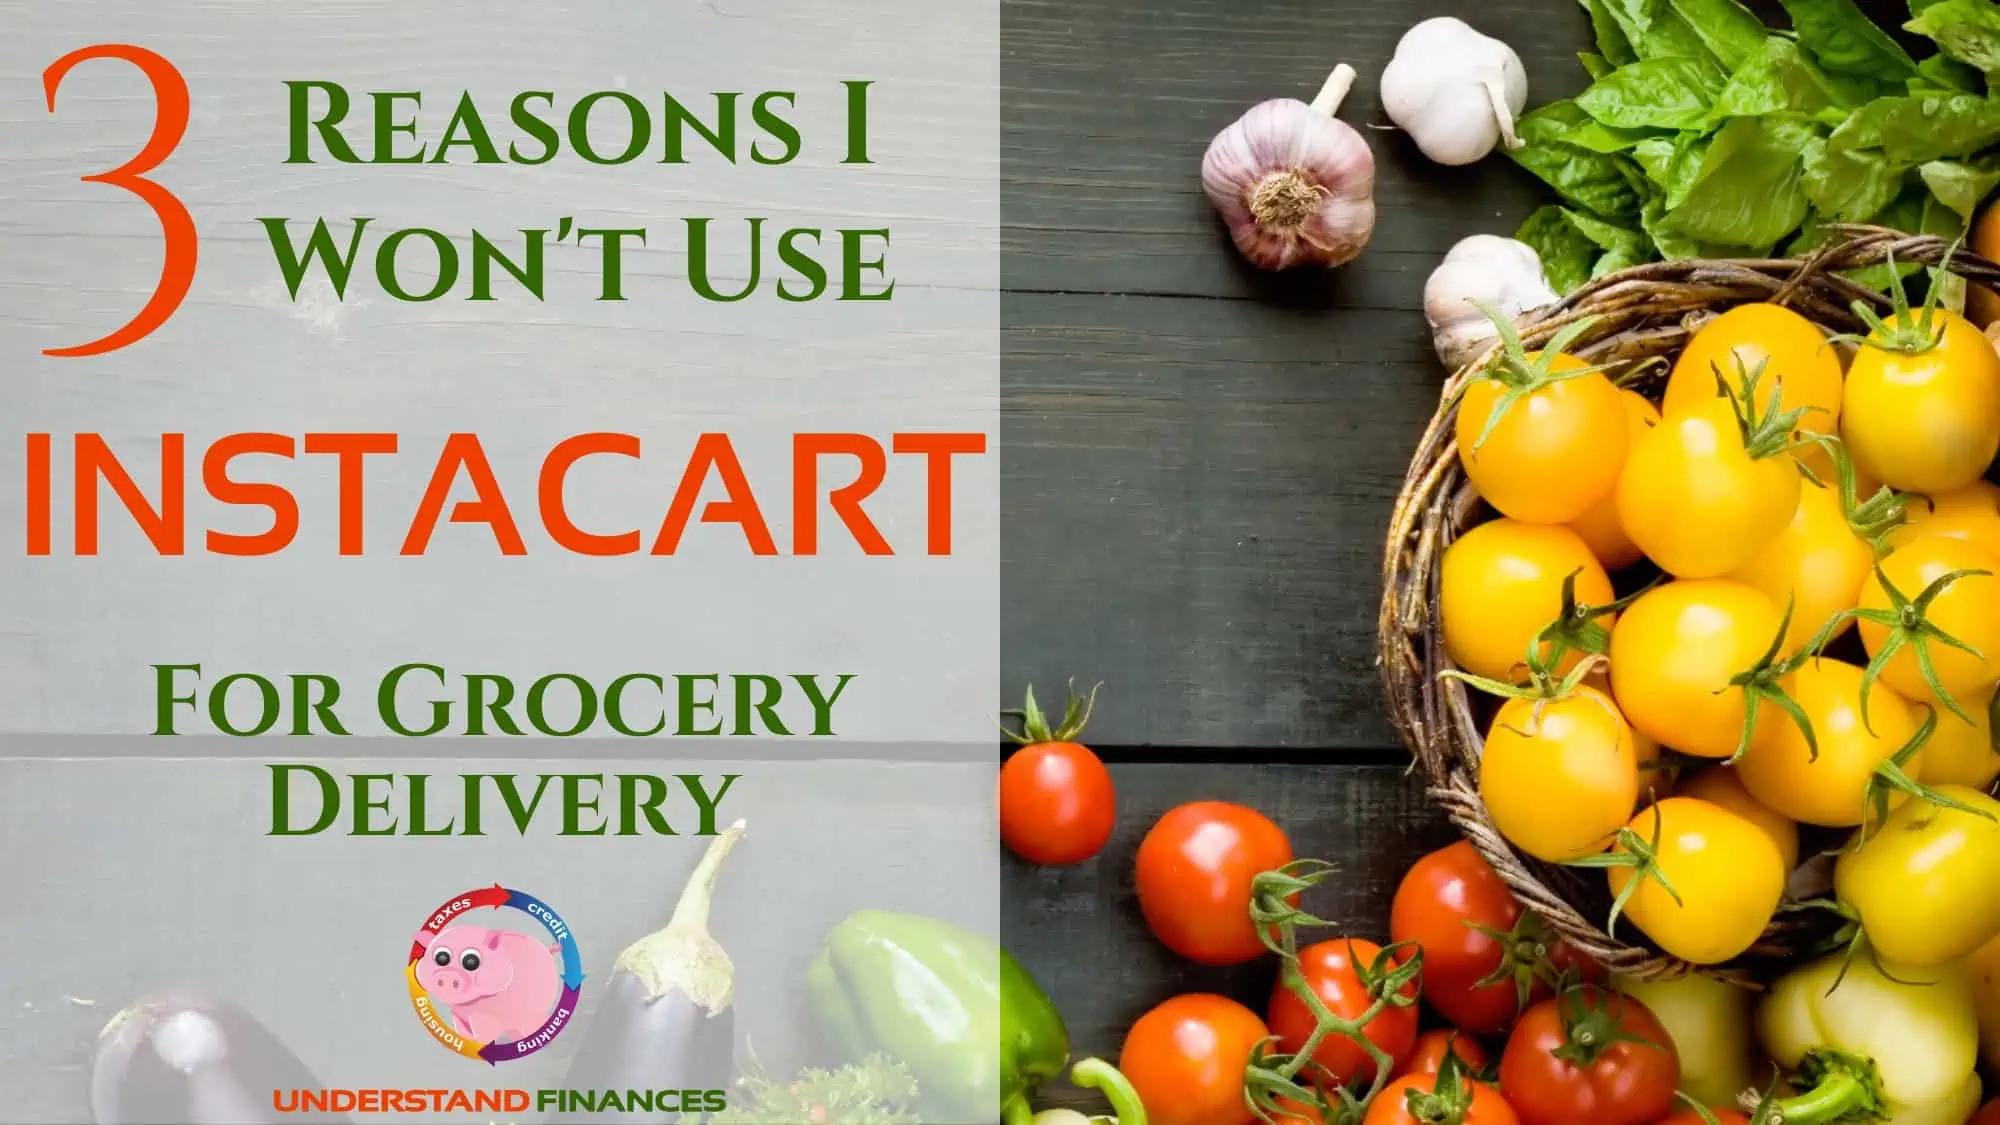 3 Reasons Instacart Grocery Delivery Service Is A Big No-Go For Me